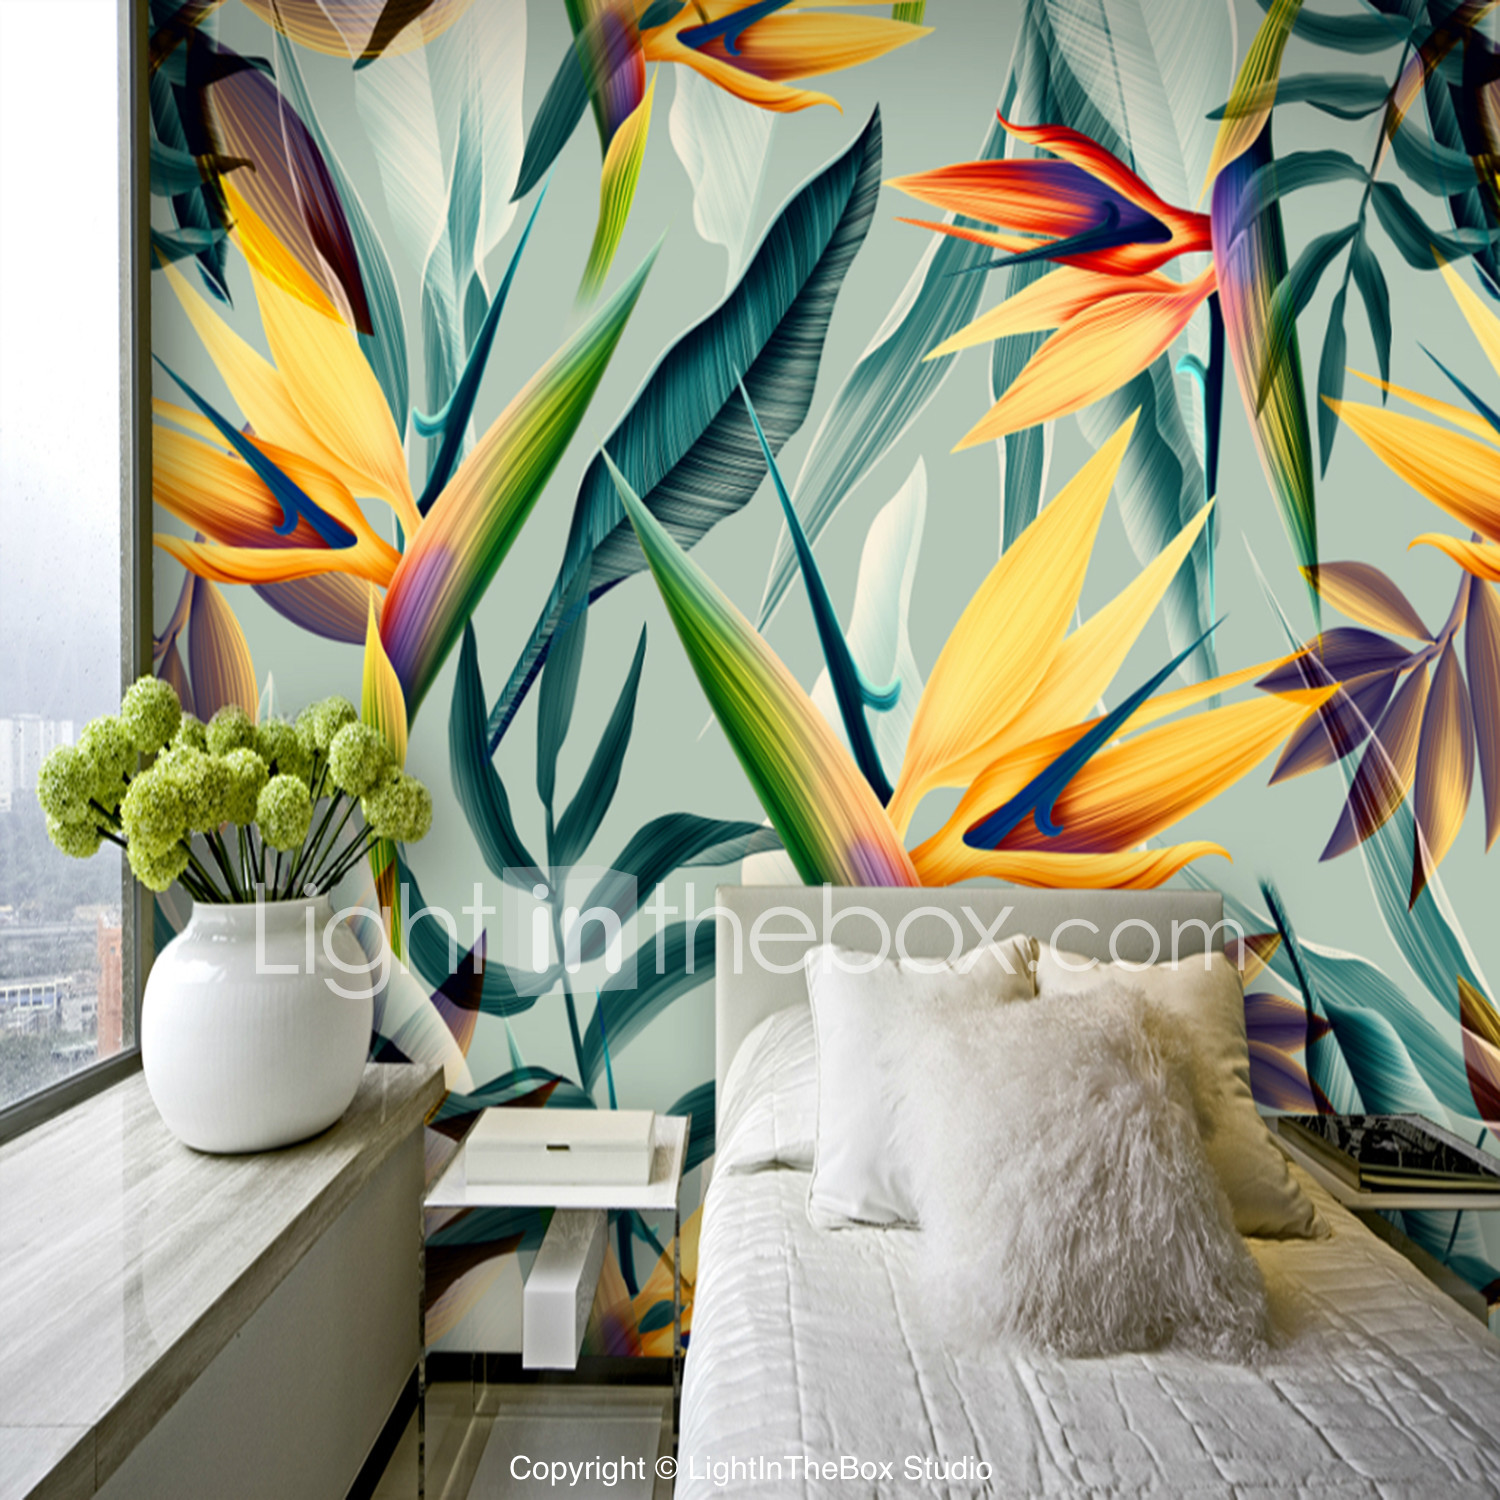 Colorful Tropical Leaf Wallpaper Mural Canvas Wall Covering 7120164